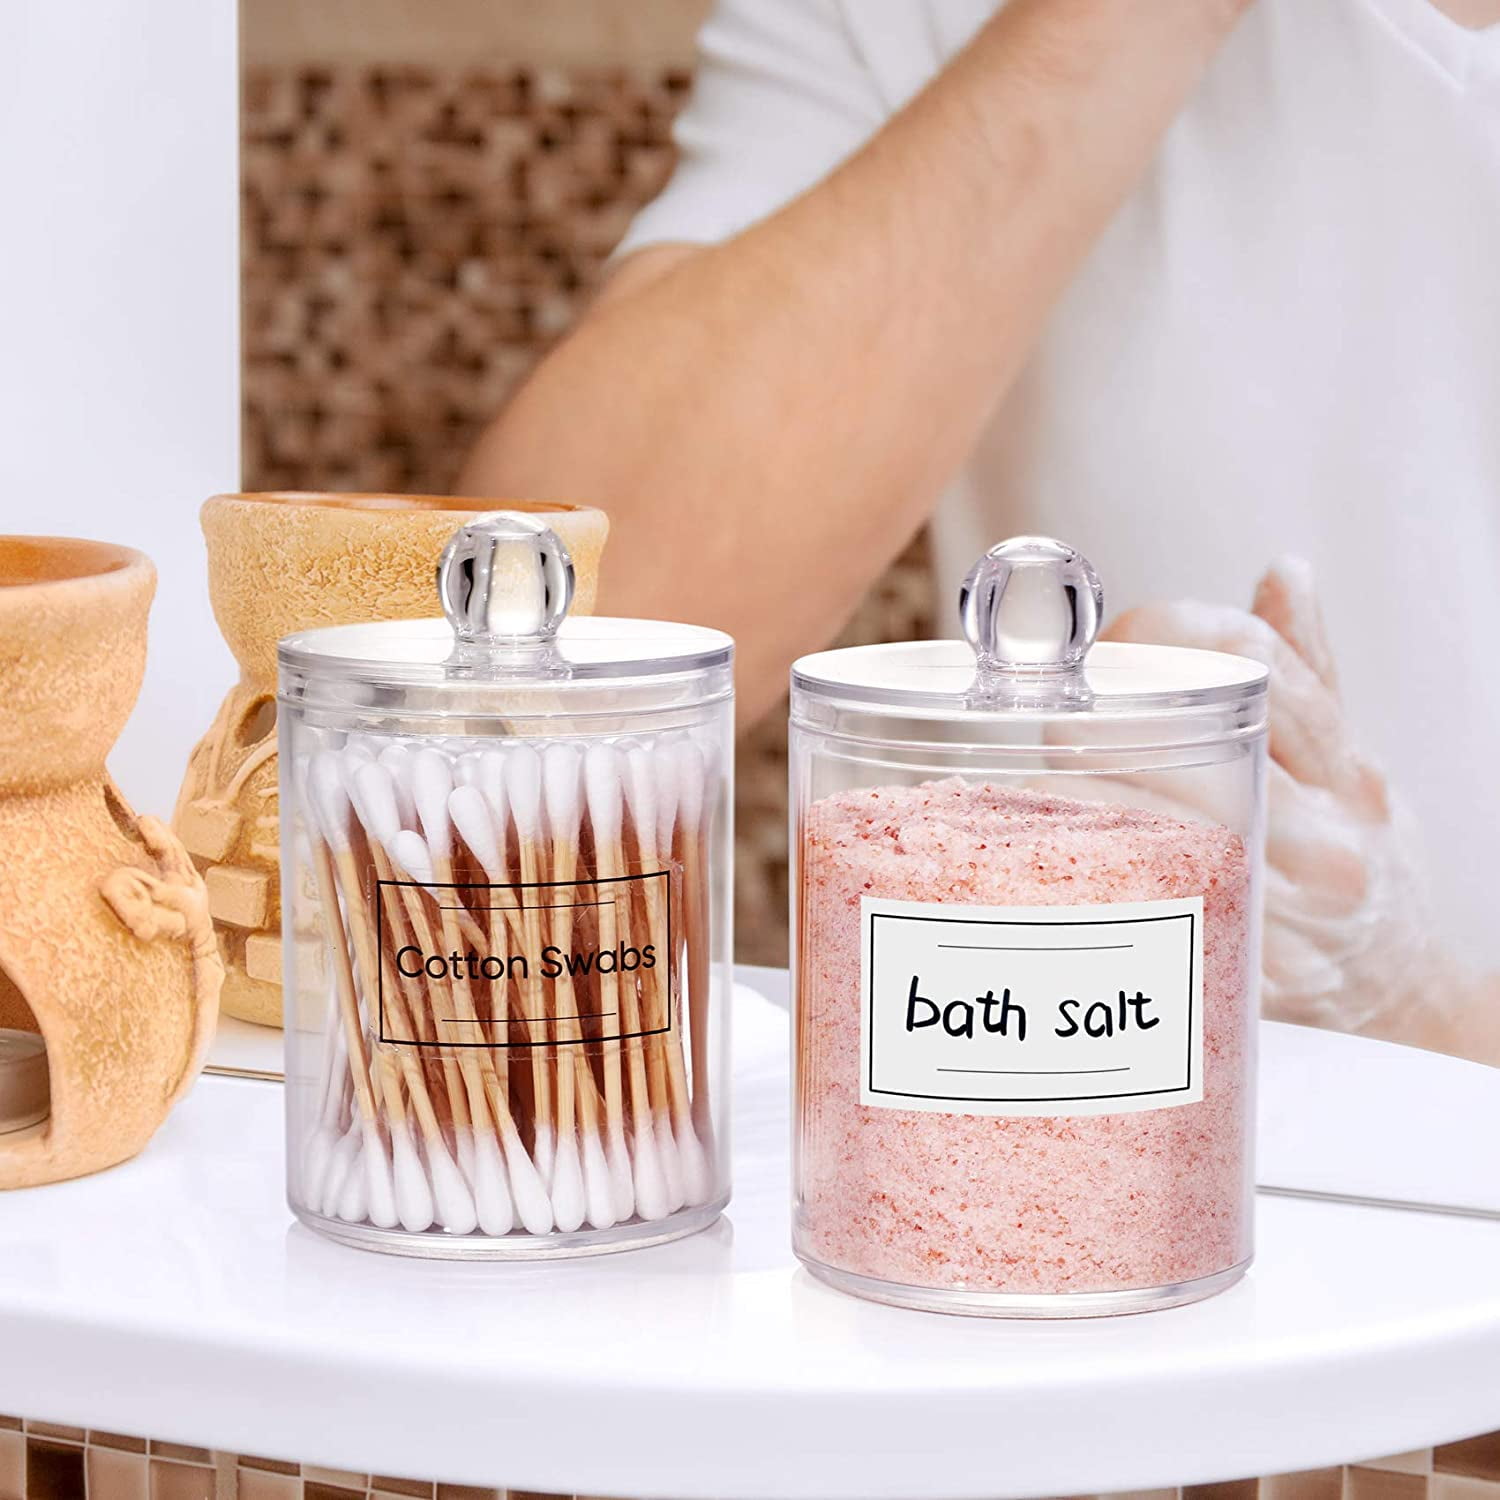  ALAMHI 2 Pack Qtip Holder Apothecary Jars with Lids